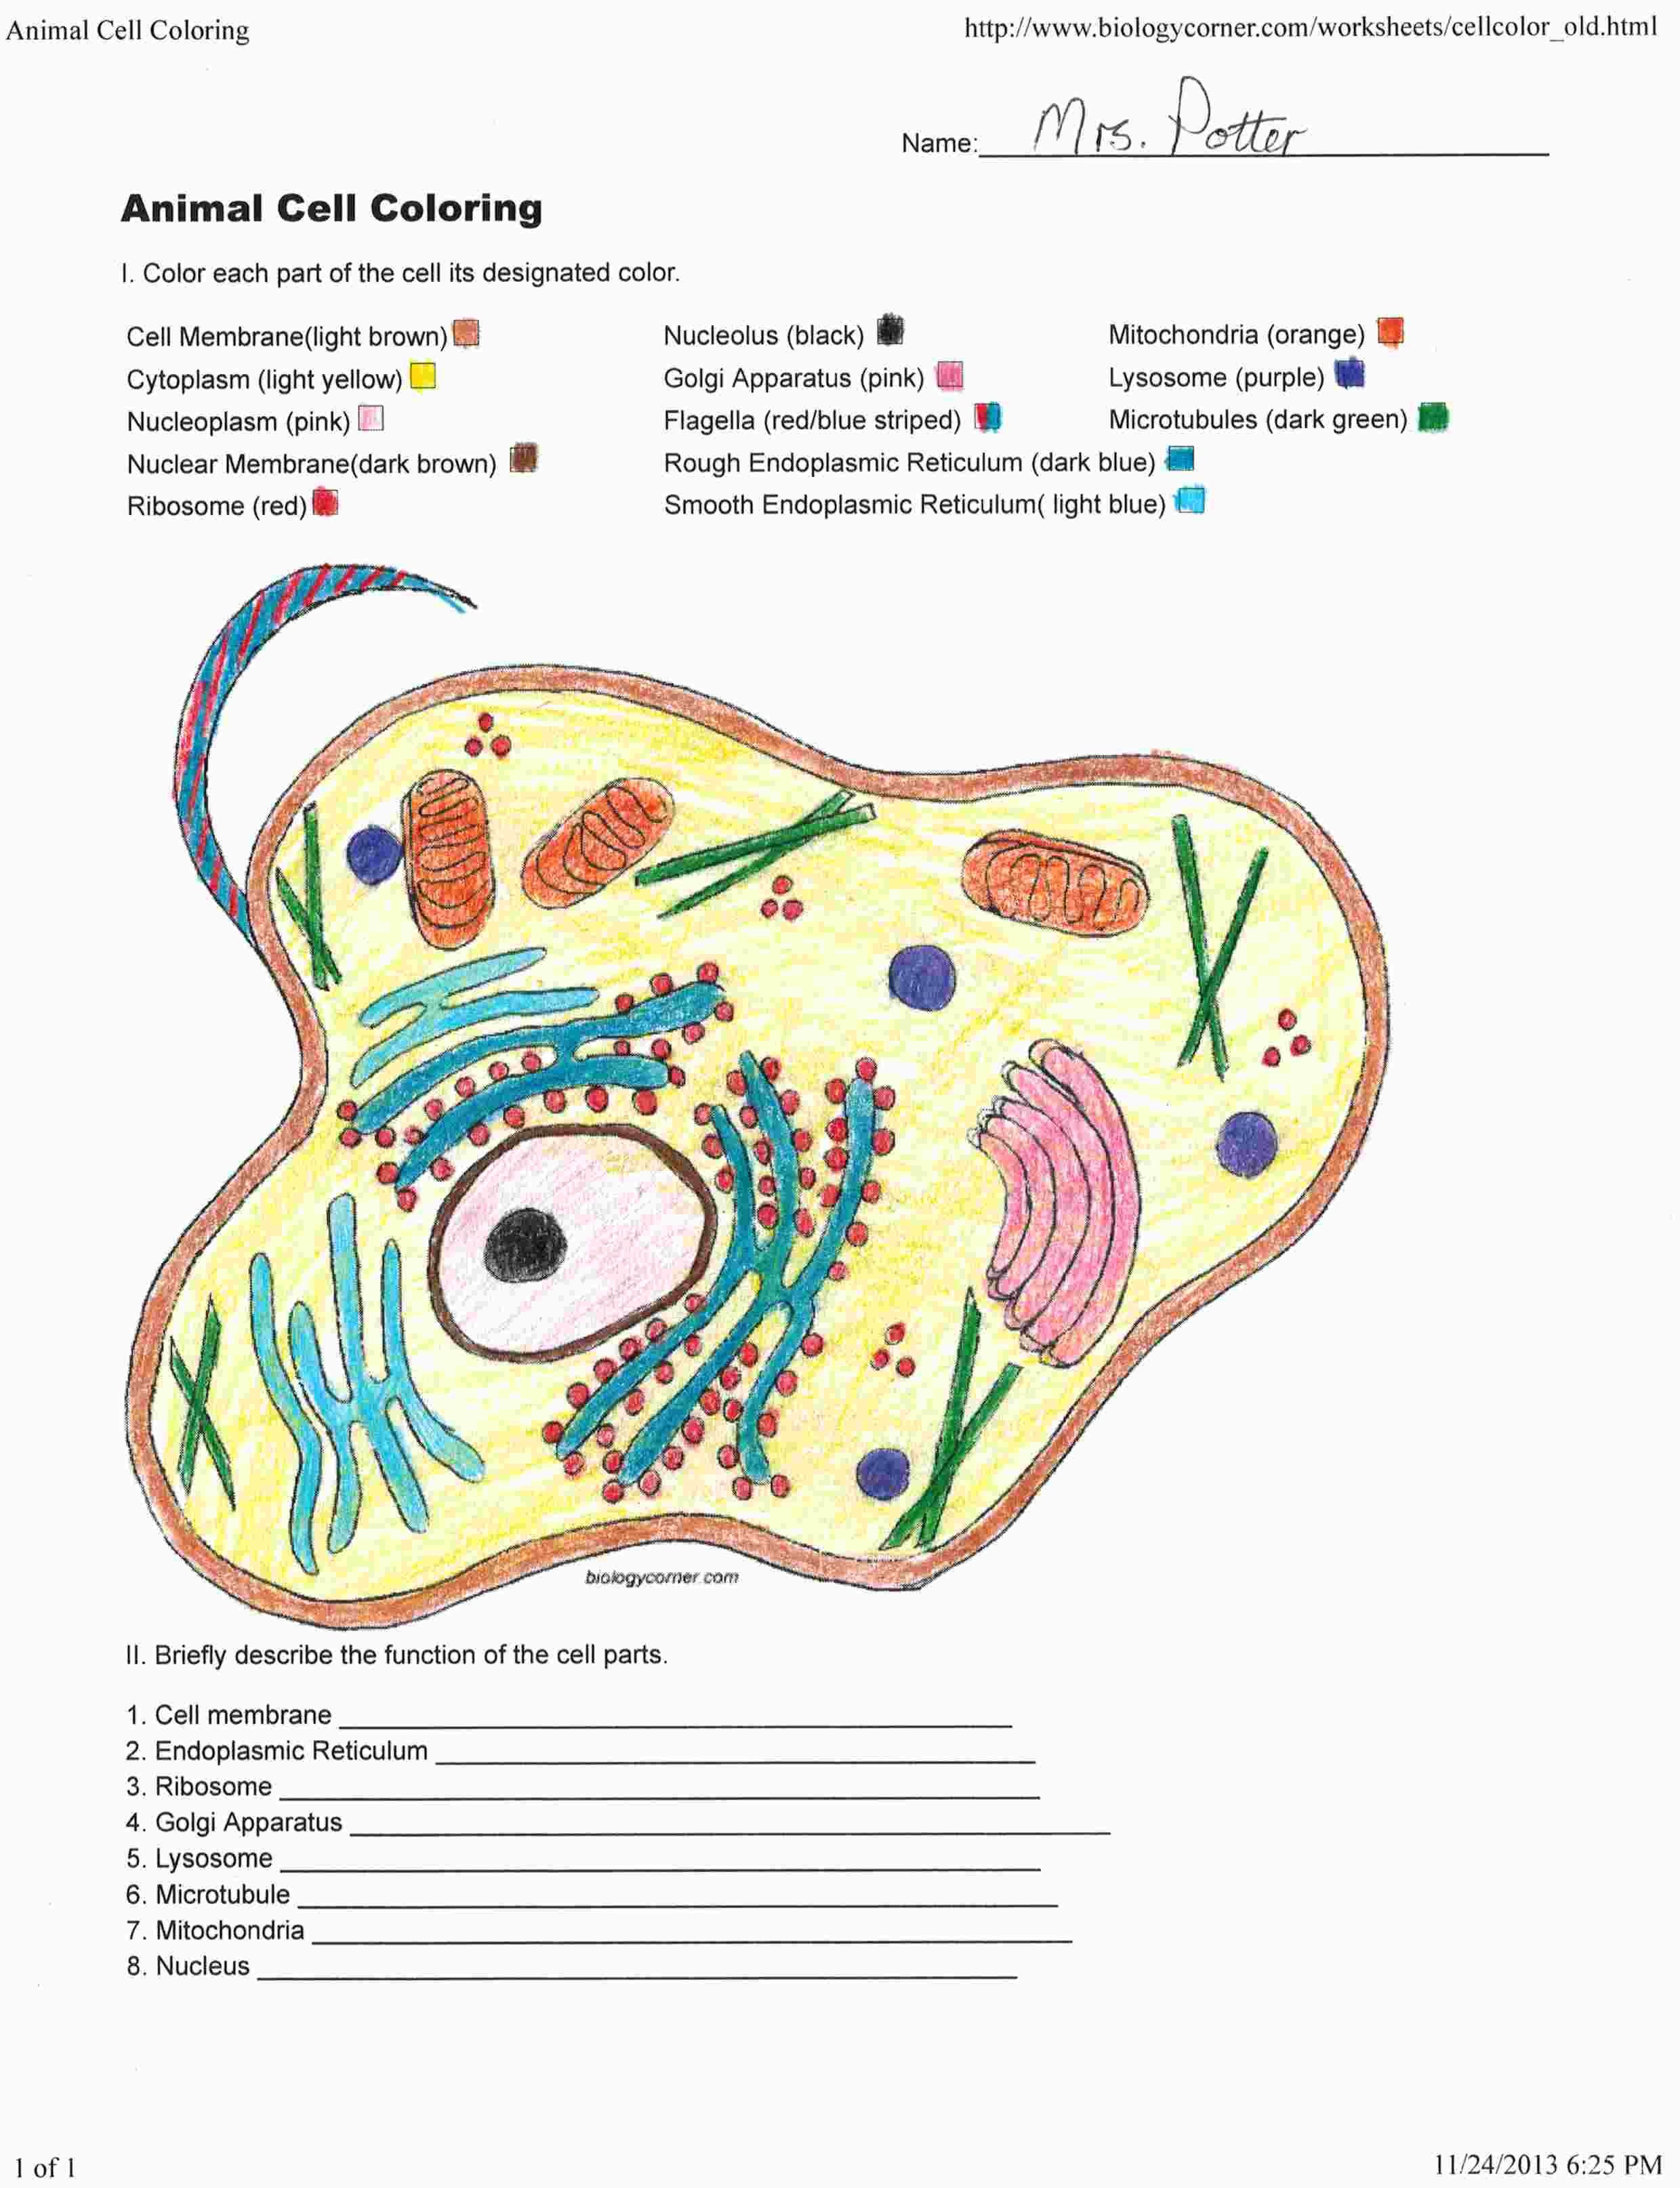 Cell Coloring Worksheets Coloring Sheet Labeled Animal Cell Coloring Key